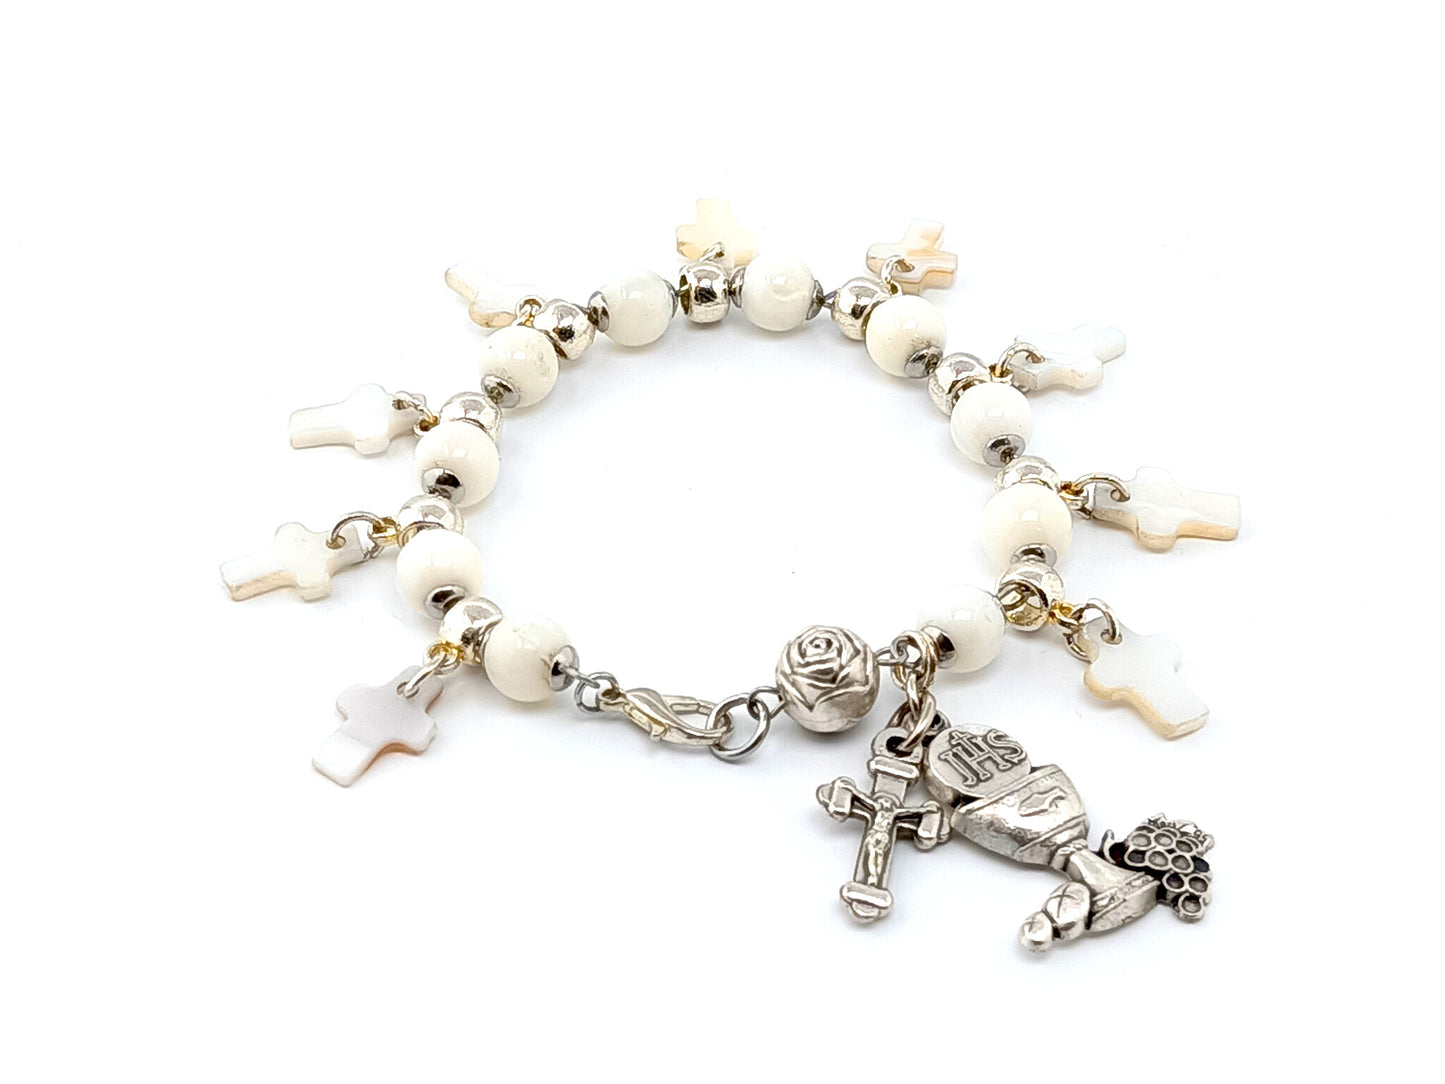 First Holy Communion unique rosary beads bracelet with mother of pearl beads and crosses, small crucifix and chalice medal.